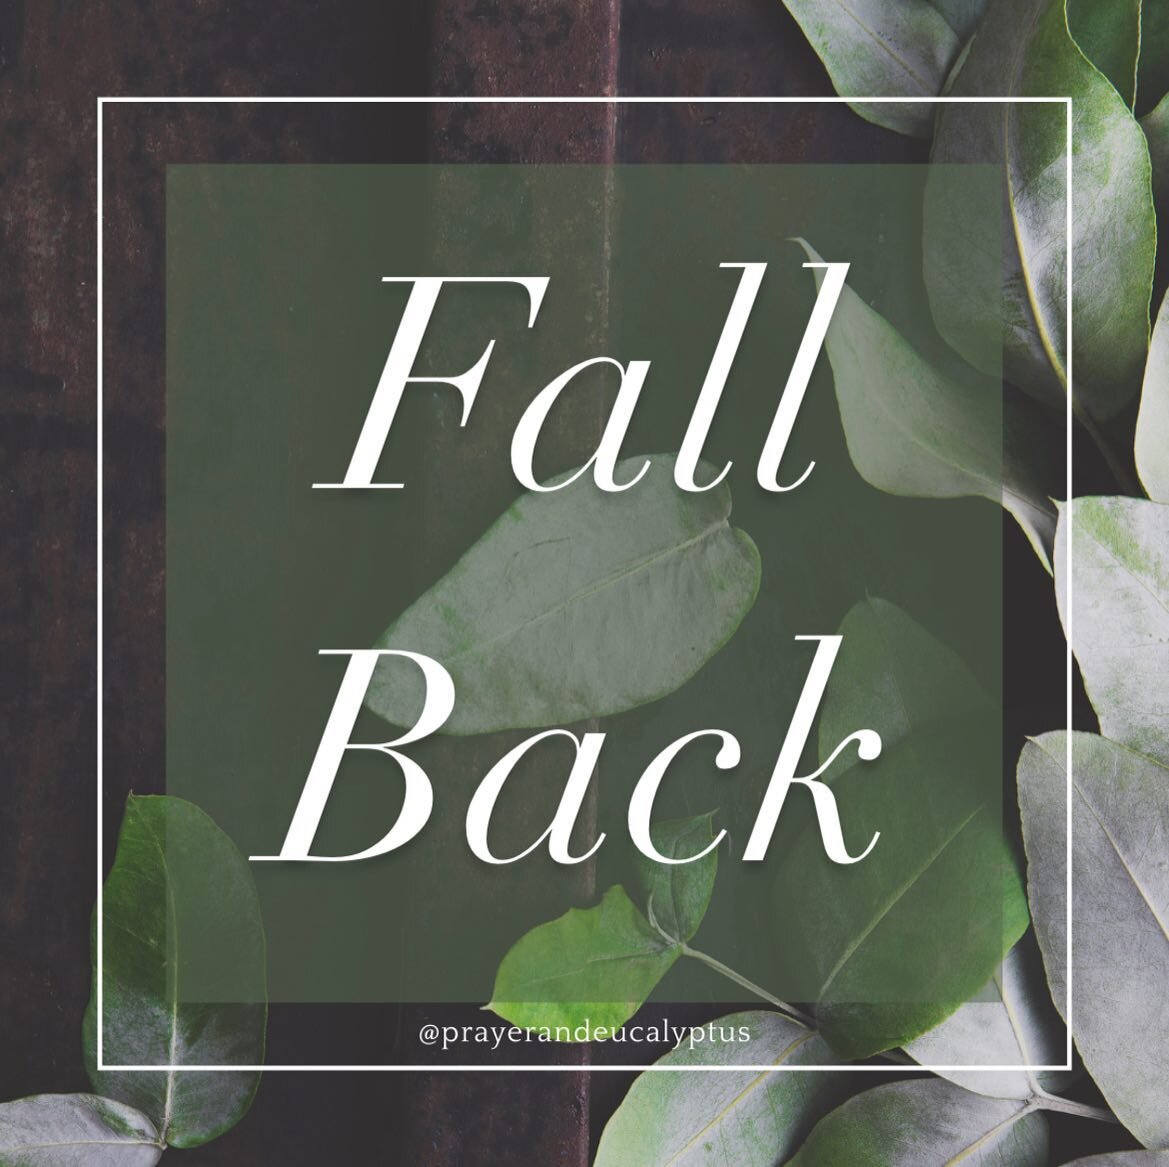 Today as I went to reset all my clocks back an hour, I heard God simply say&hellip; Ralonda &ldquo;fall back&rdquo; &amp; watch me work. It blessed me so I&rsquo;m sharing with you. Whatever your situation #fallback &amp; #watchGodwork #sweetsleep

&